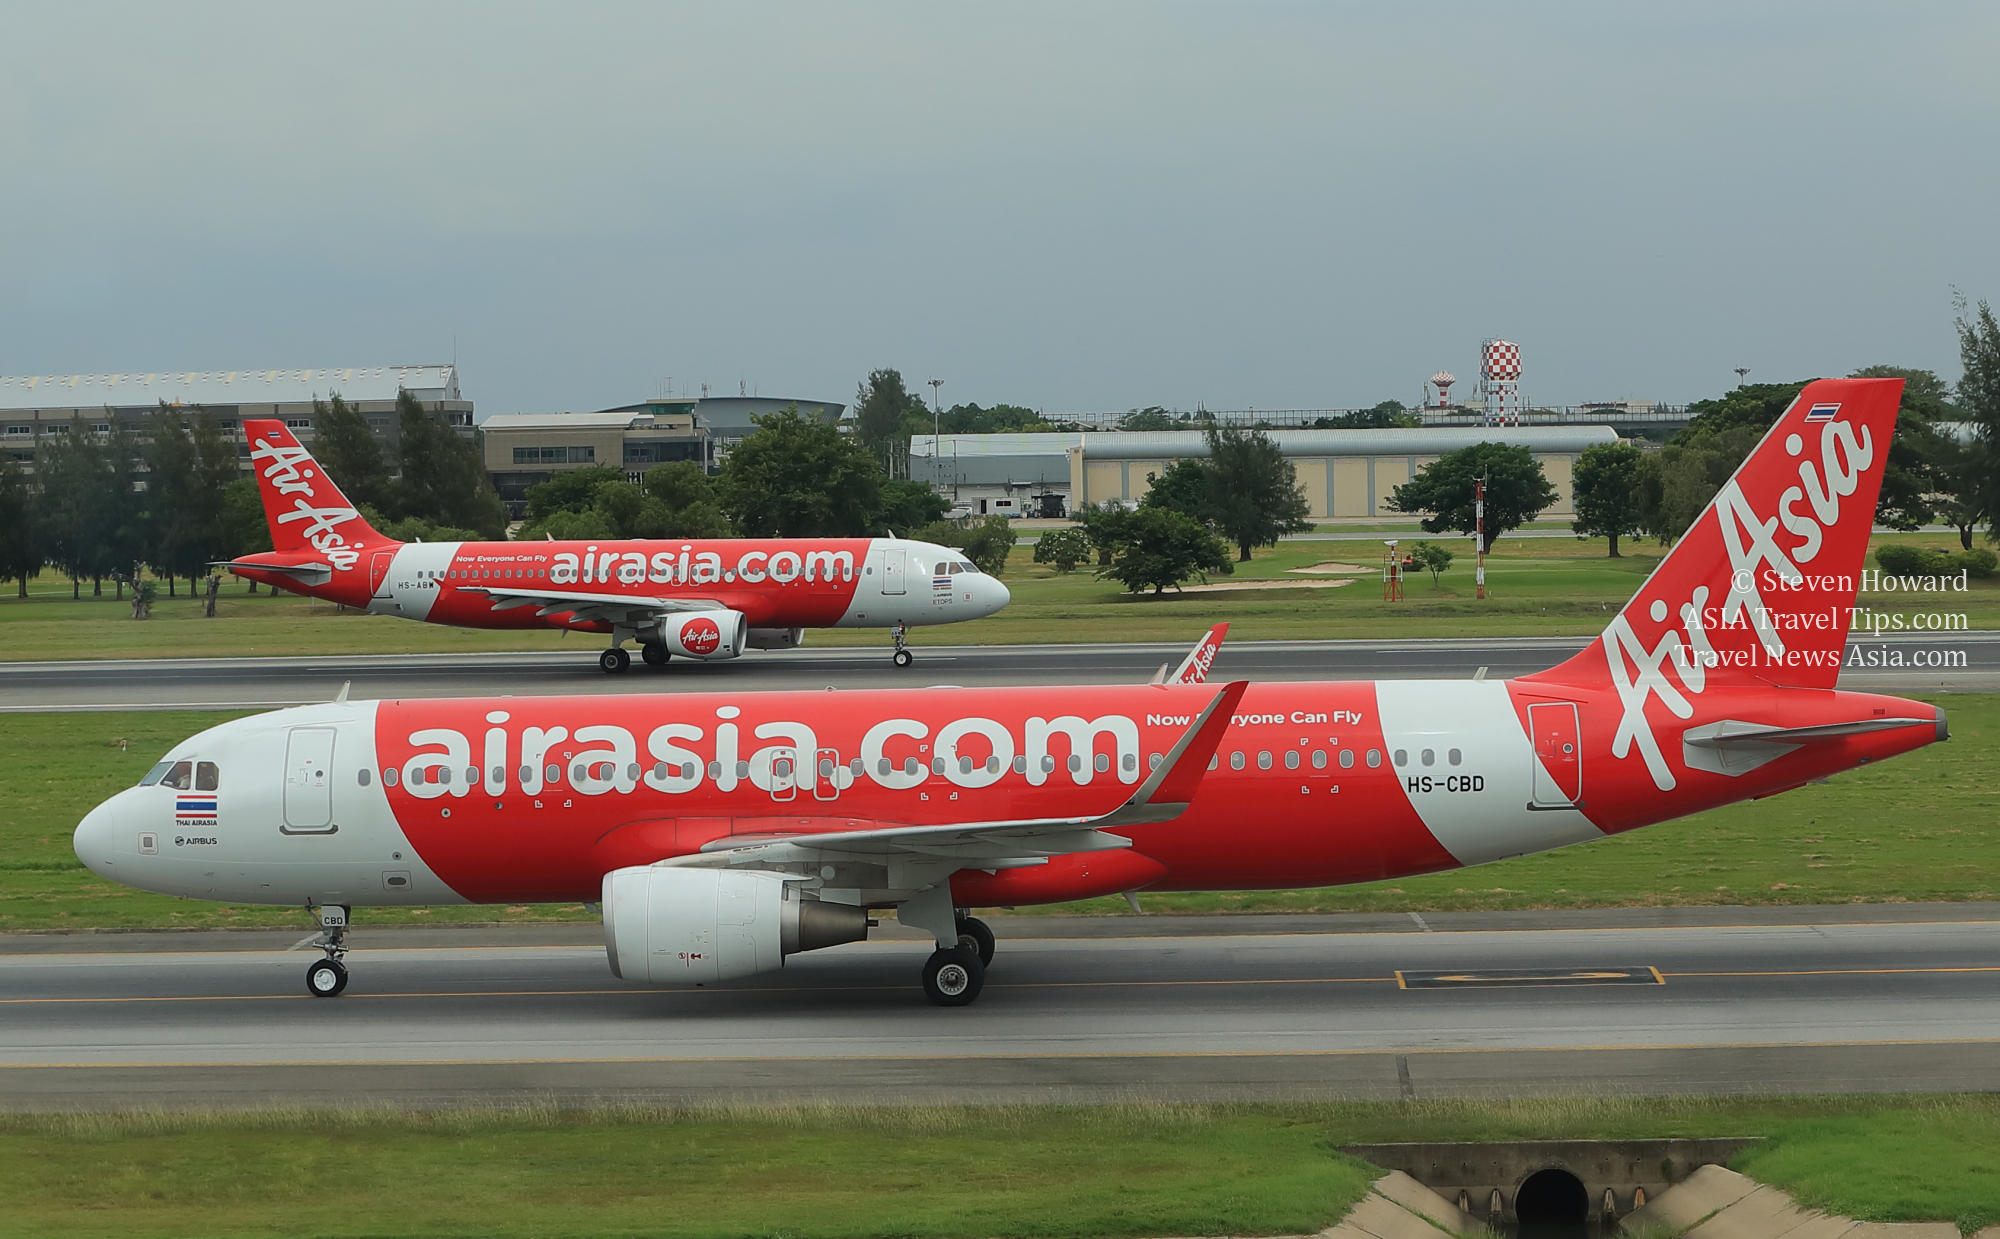 Thai AirAsia Airbus A320 aircraft at Don Mueang Int. Airport (DMK) in Bangkok, Thailand. Picture by Steven Howard of TravelNewsAsia.com Click to enlarge.